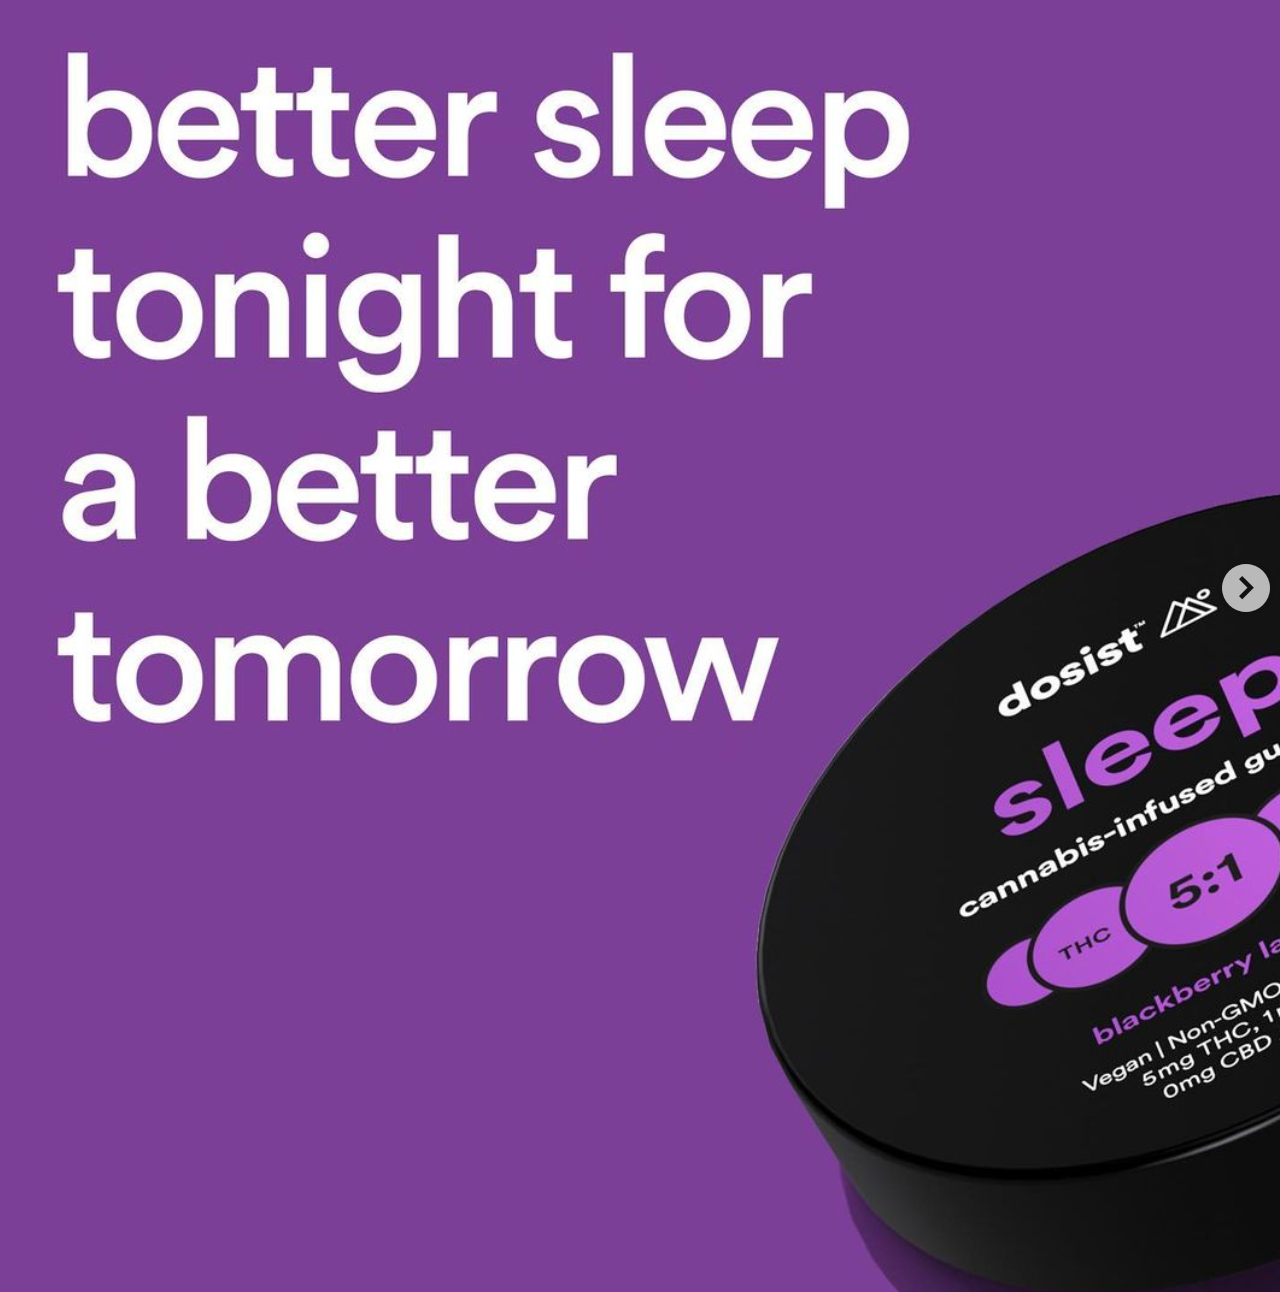 The Sleep gummy by Dosist contains CBN